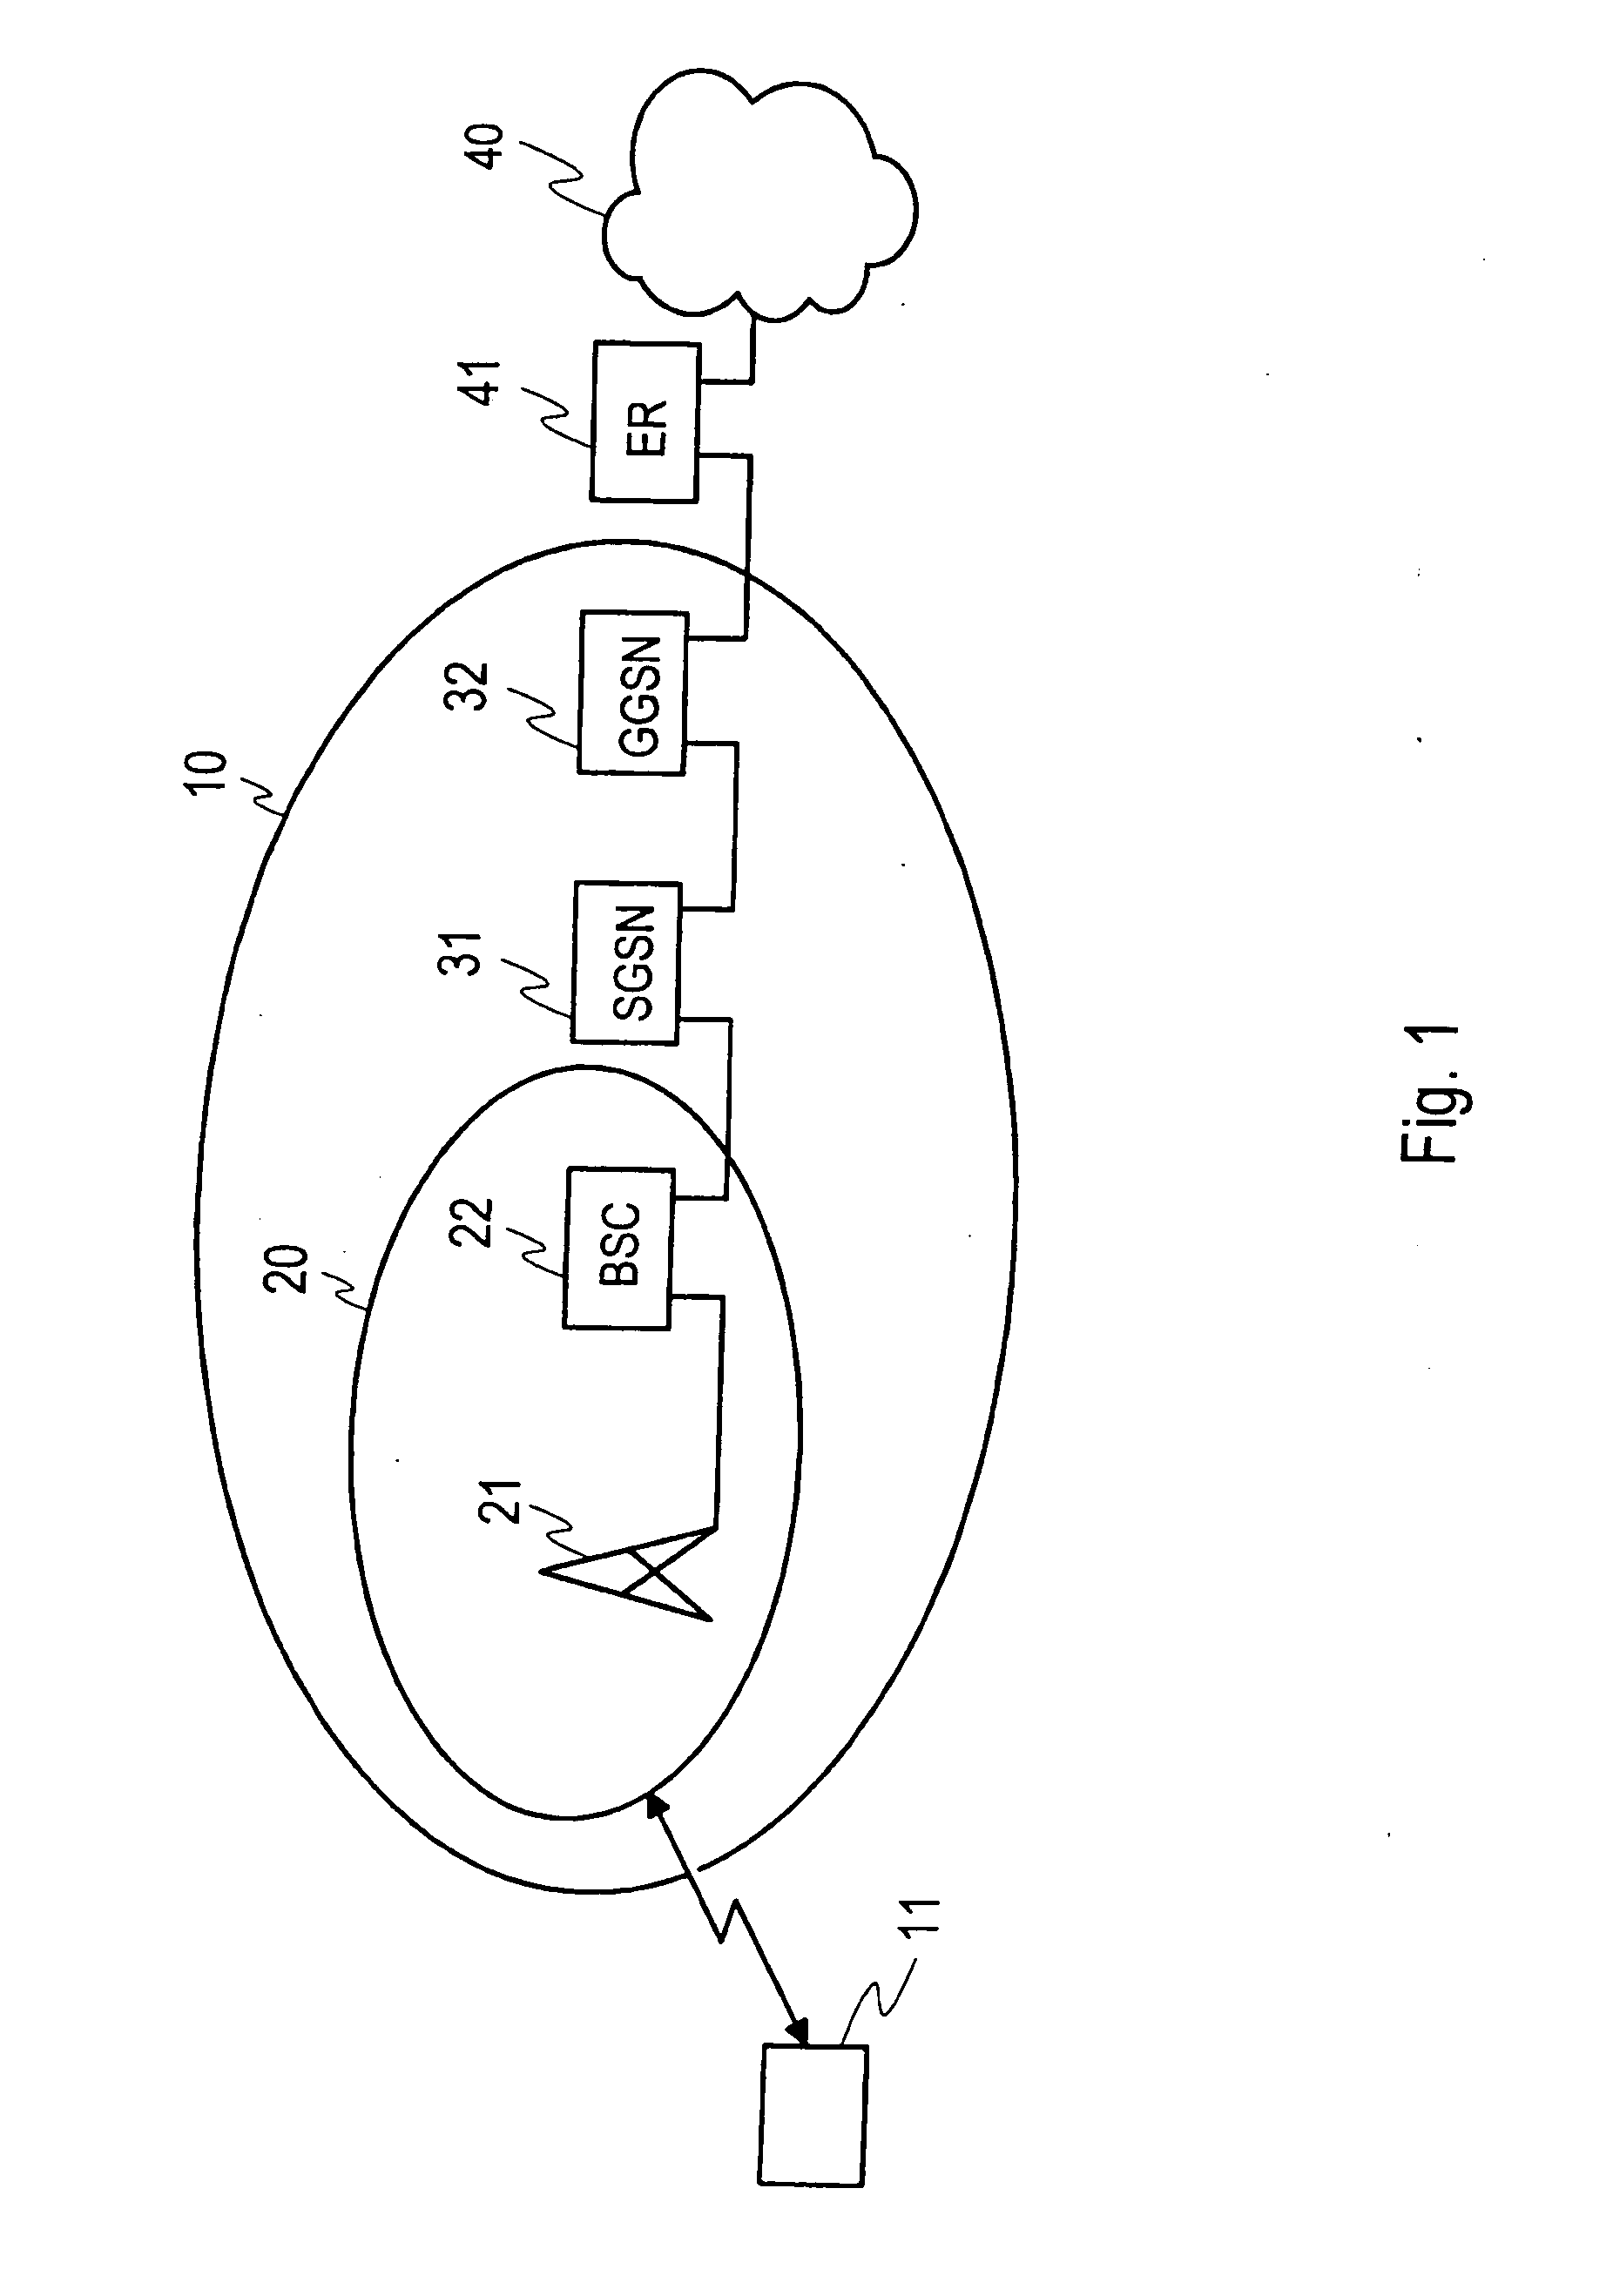 Processing of packet data in a communication system